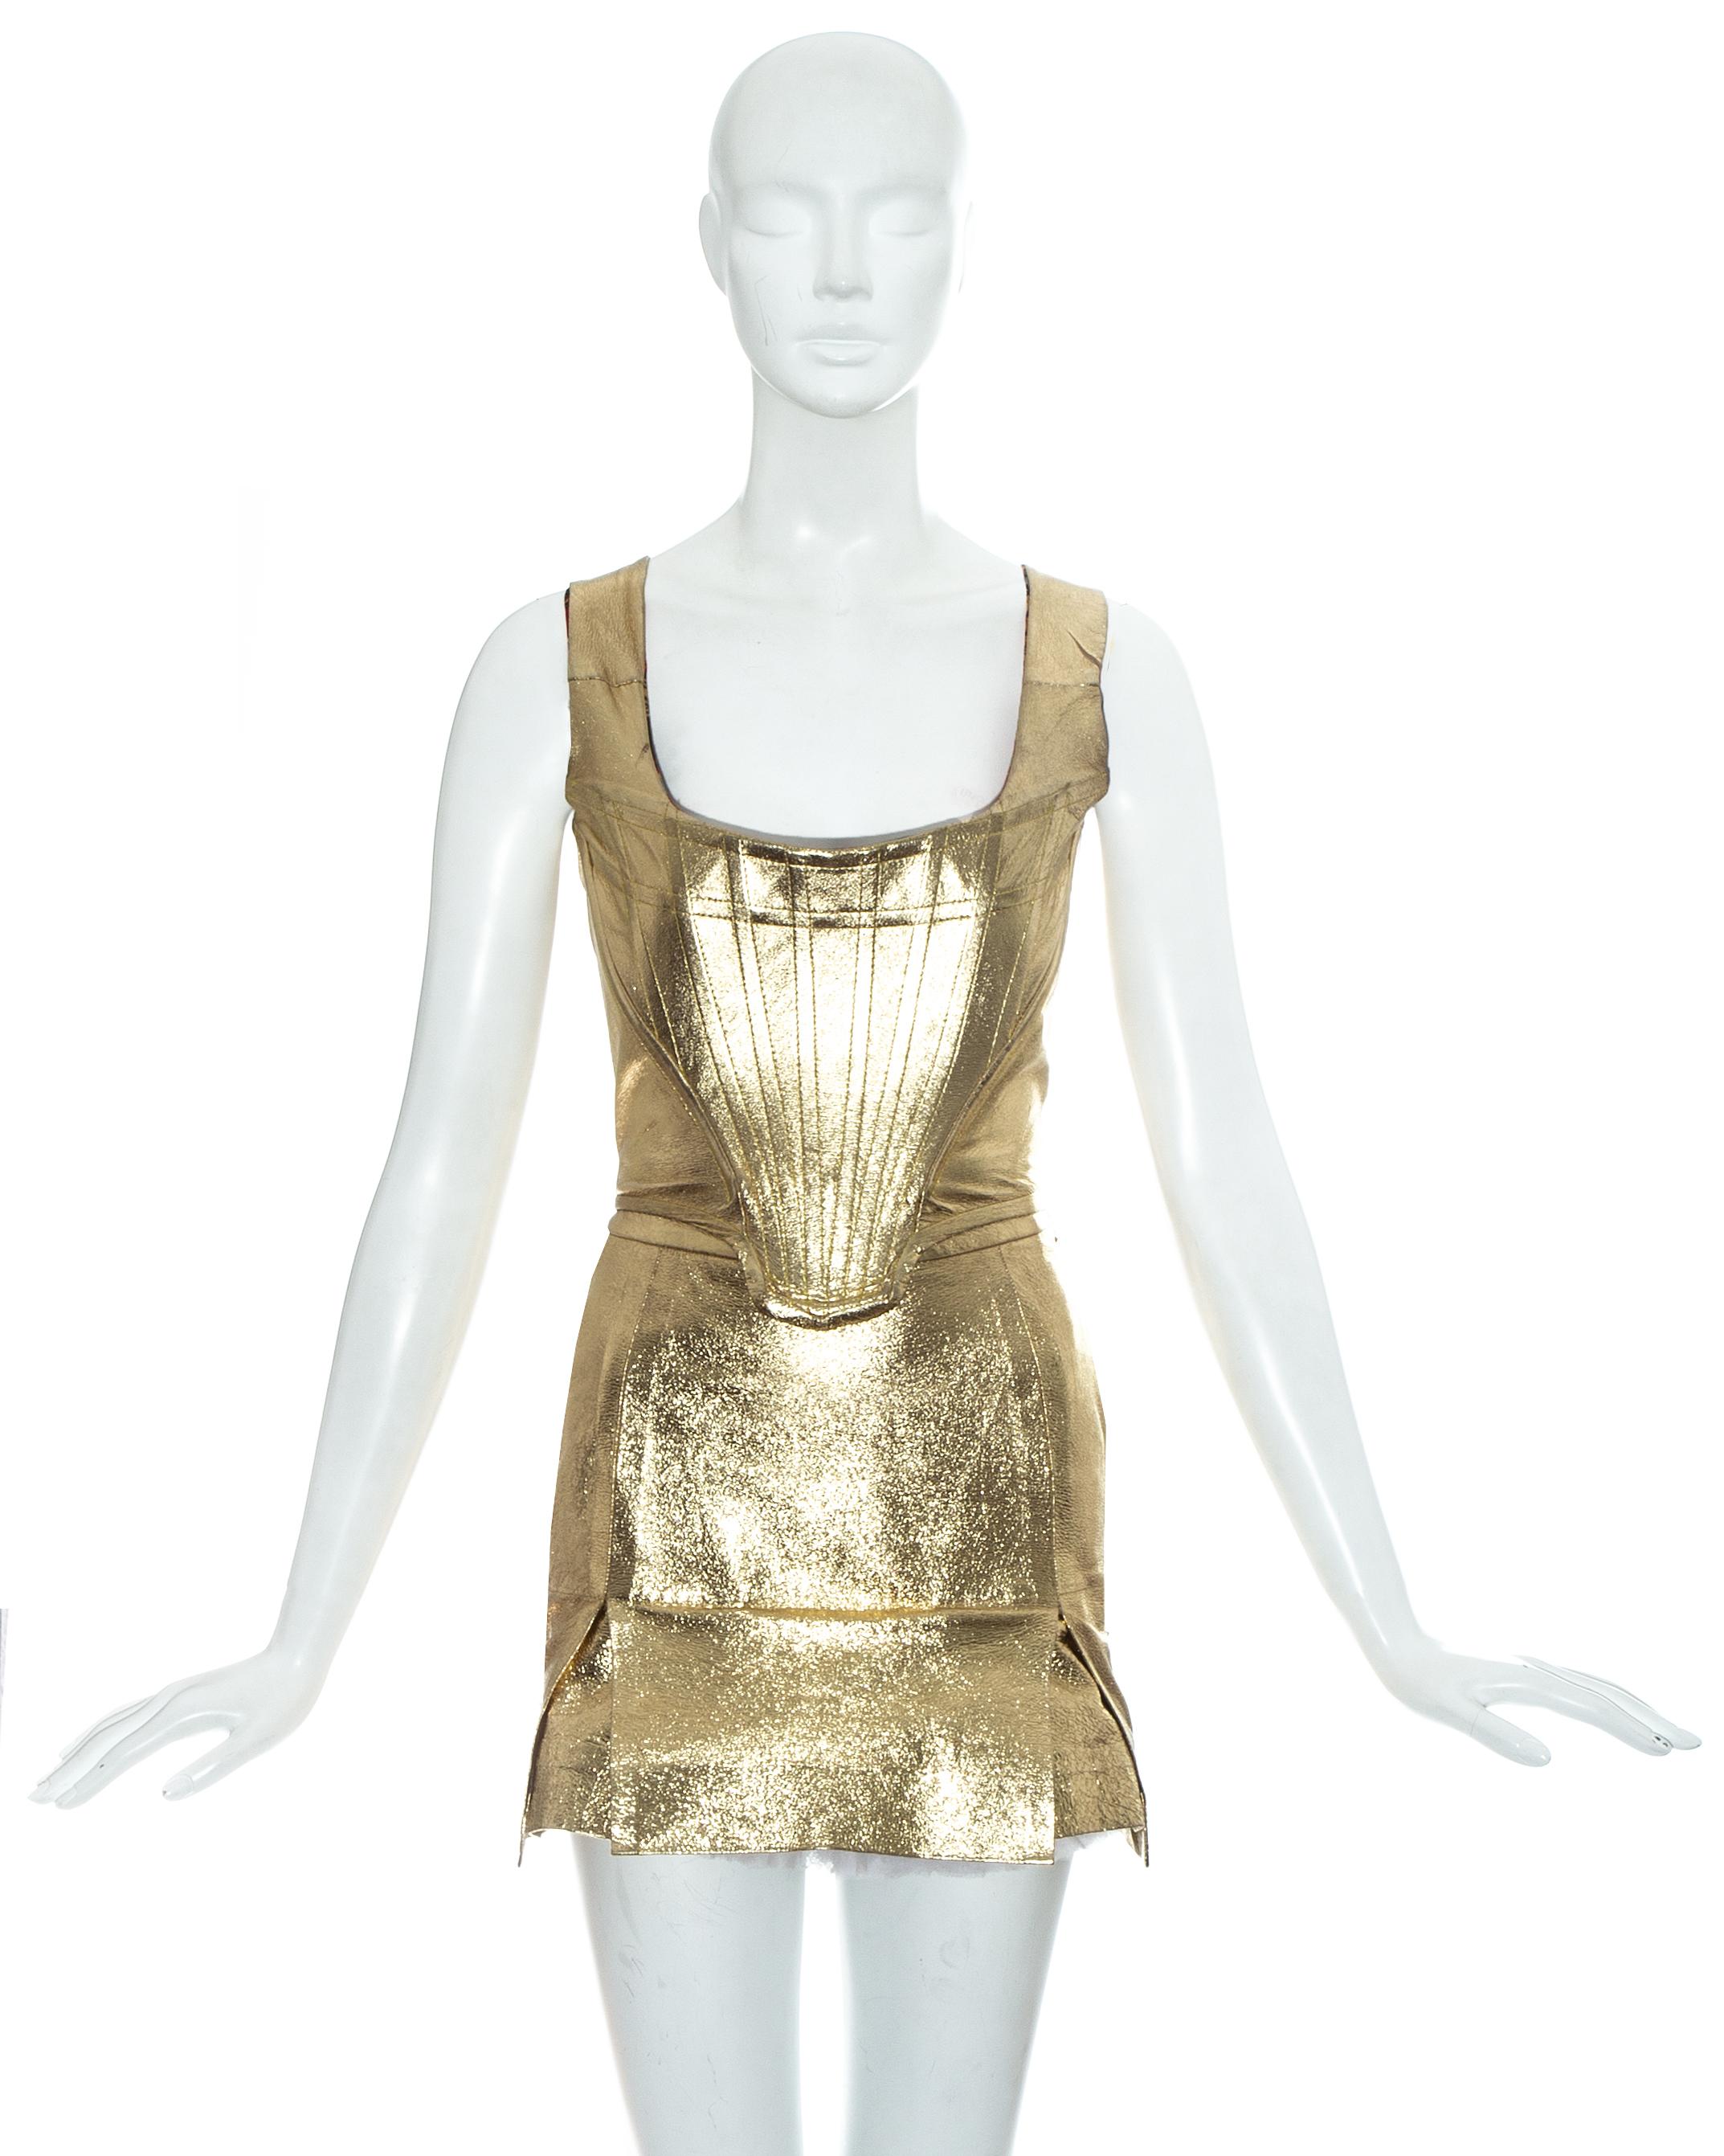 Vivienne Westwood; gold leather corset and skirt ensemble. Corset with internal boning, designed to cinch the waist and push the breasts up. High waisted mini skirt designed backwards with vent at the front and tulle petticoat.   

Time Machine'